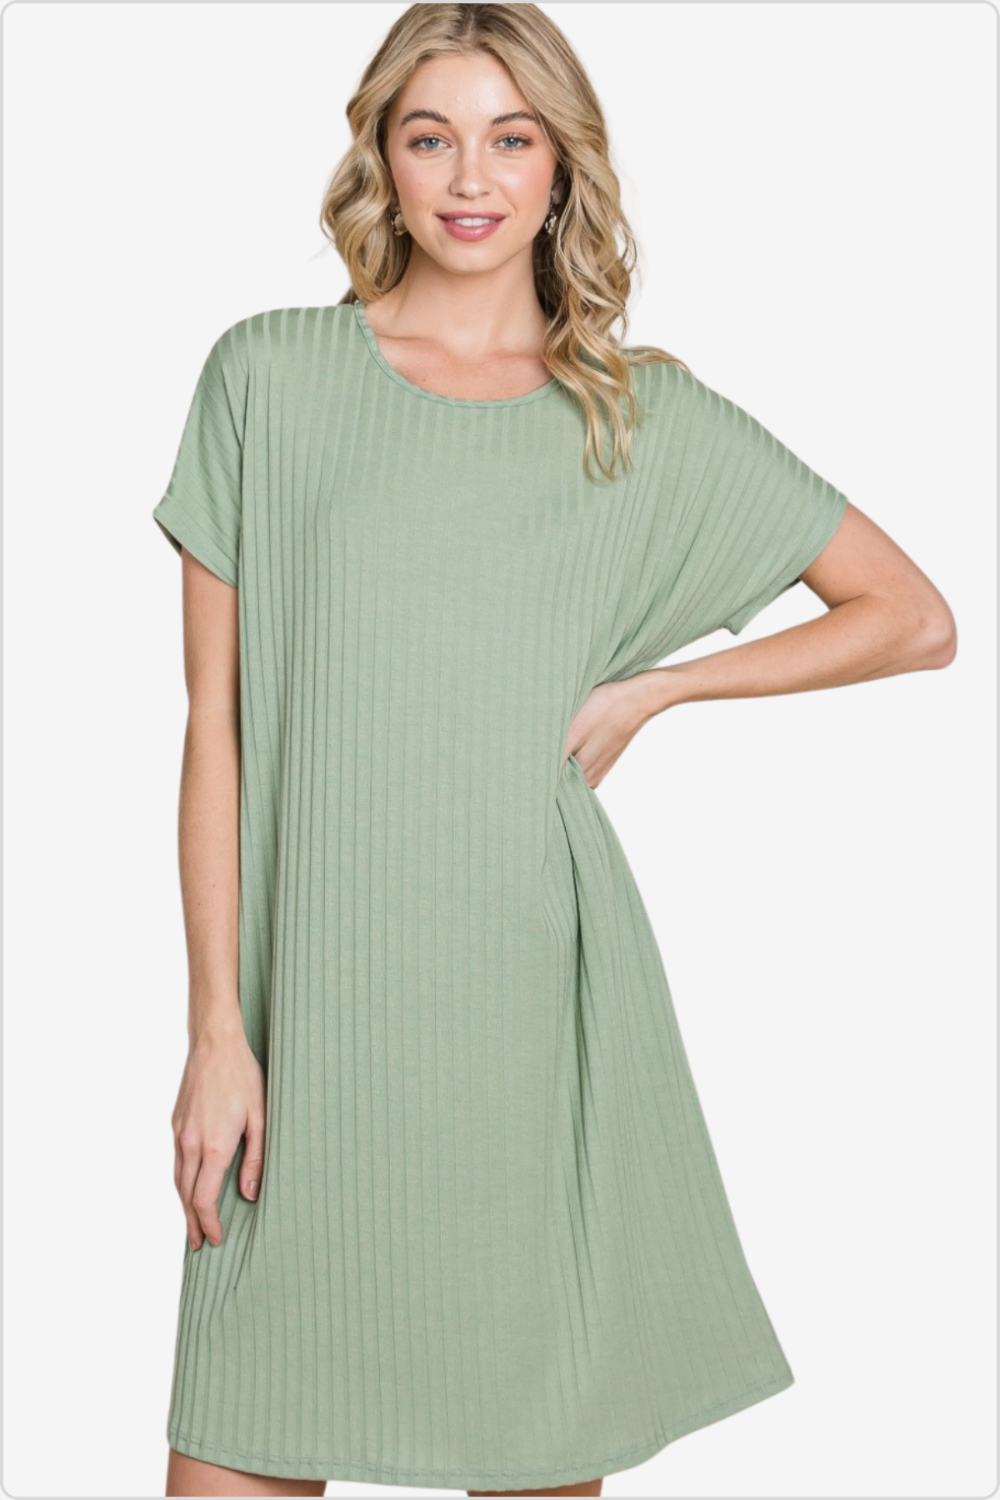 Woman in a sage green ribbed dress, embodying a relaxed yet chic aesthetic.